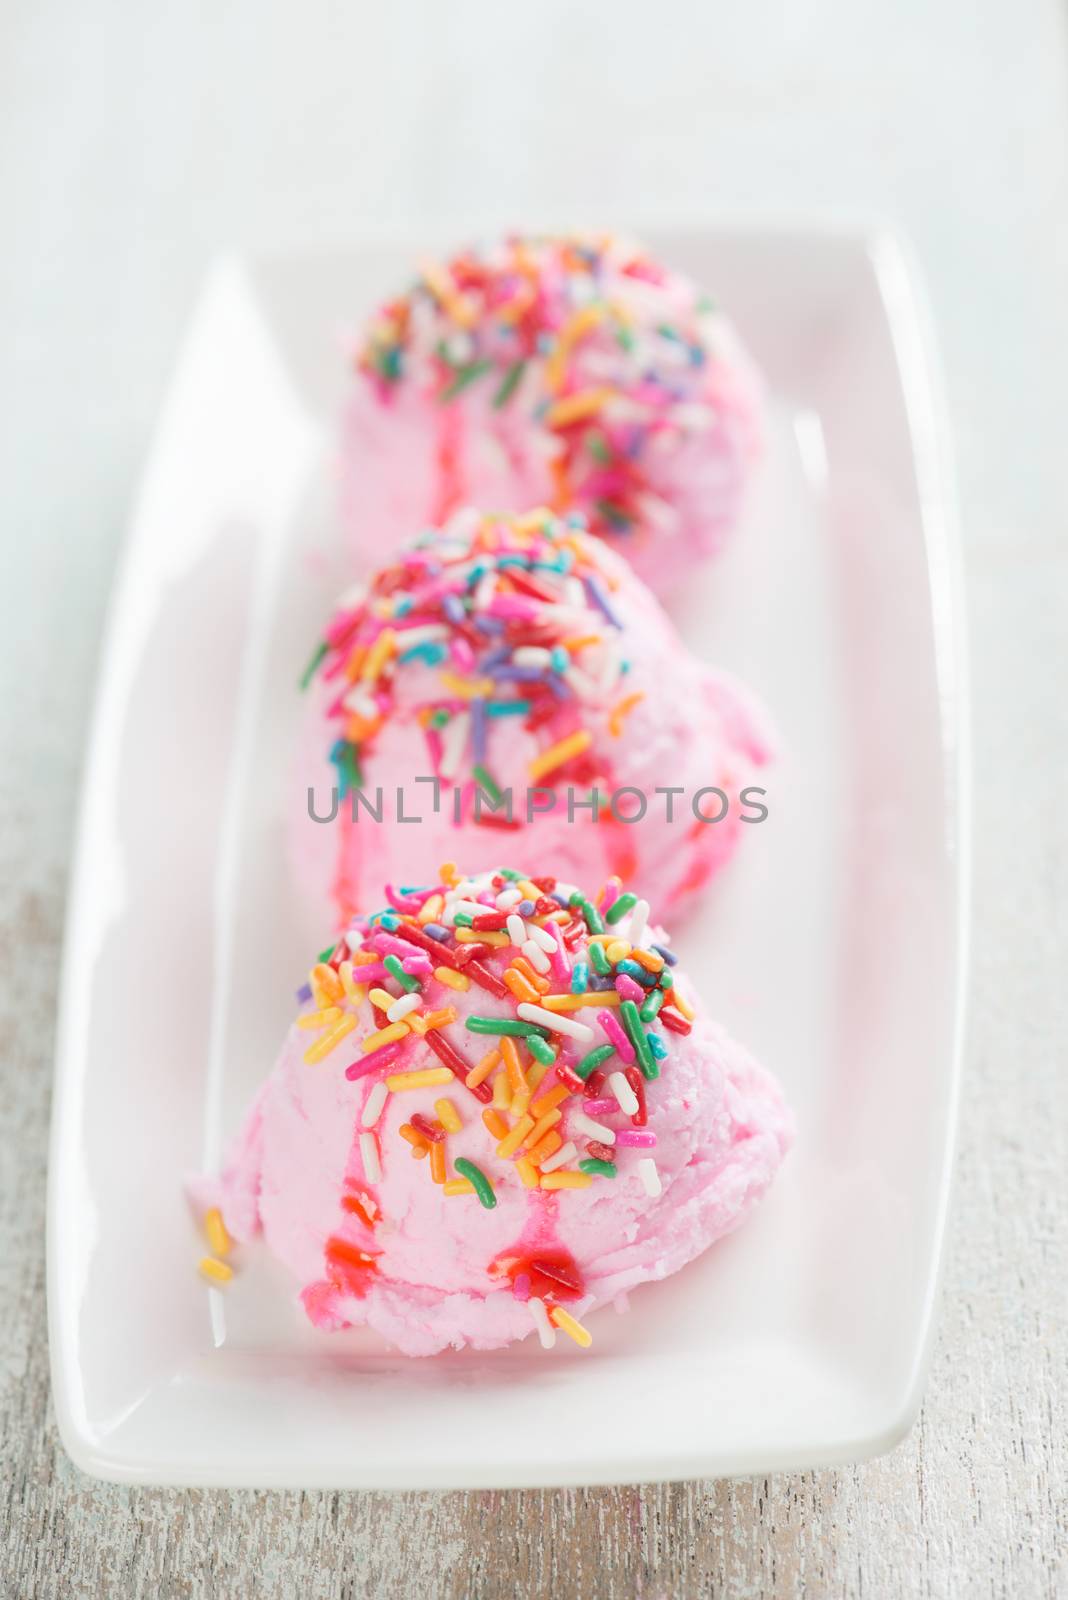 Colorful decor pink ice cream by szefei